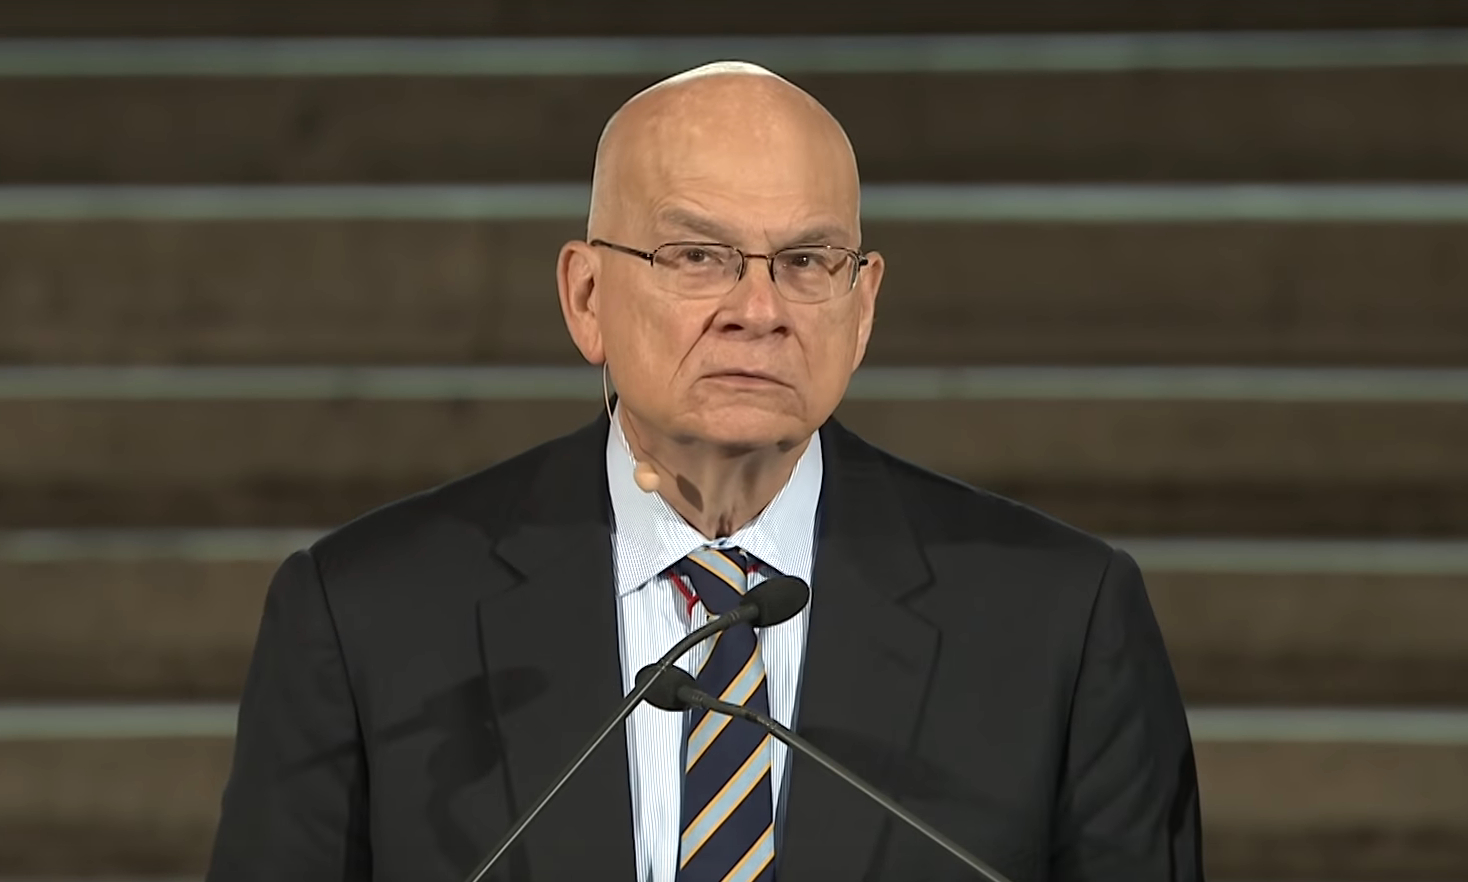 Tim Keller Urges Churches to Remain United With Baby Killers, Gay Activists, and Anti-Christian Marxists